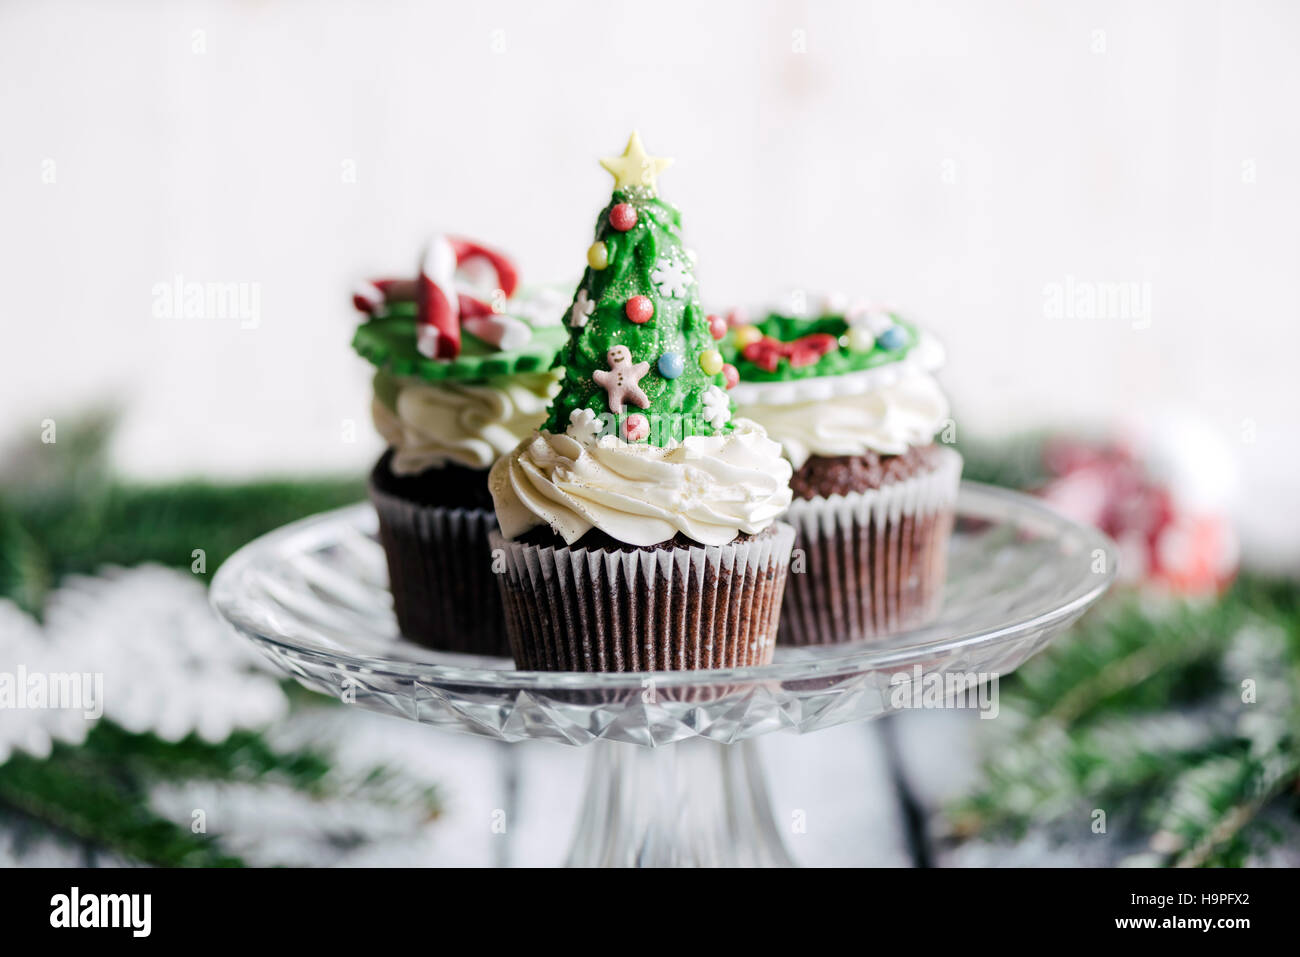 Sweet Christmas cup cakes servis, selective focus Banque D'Images